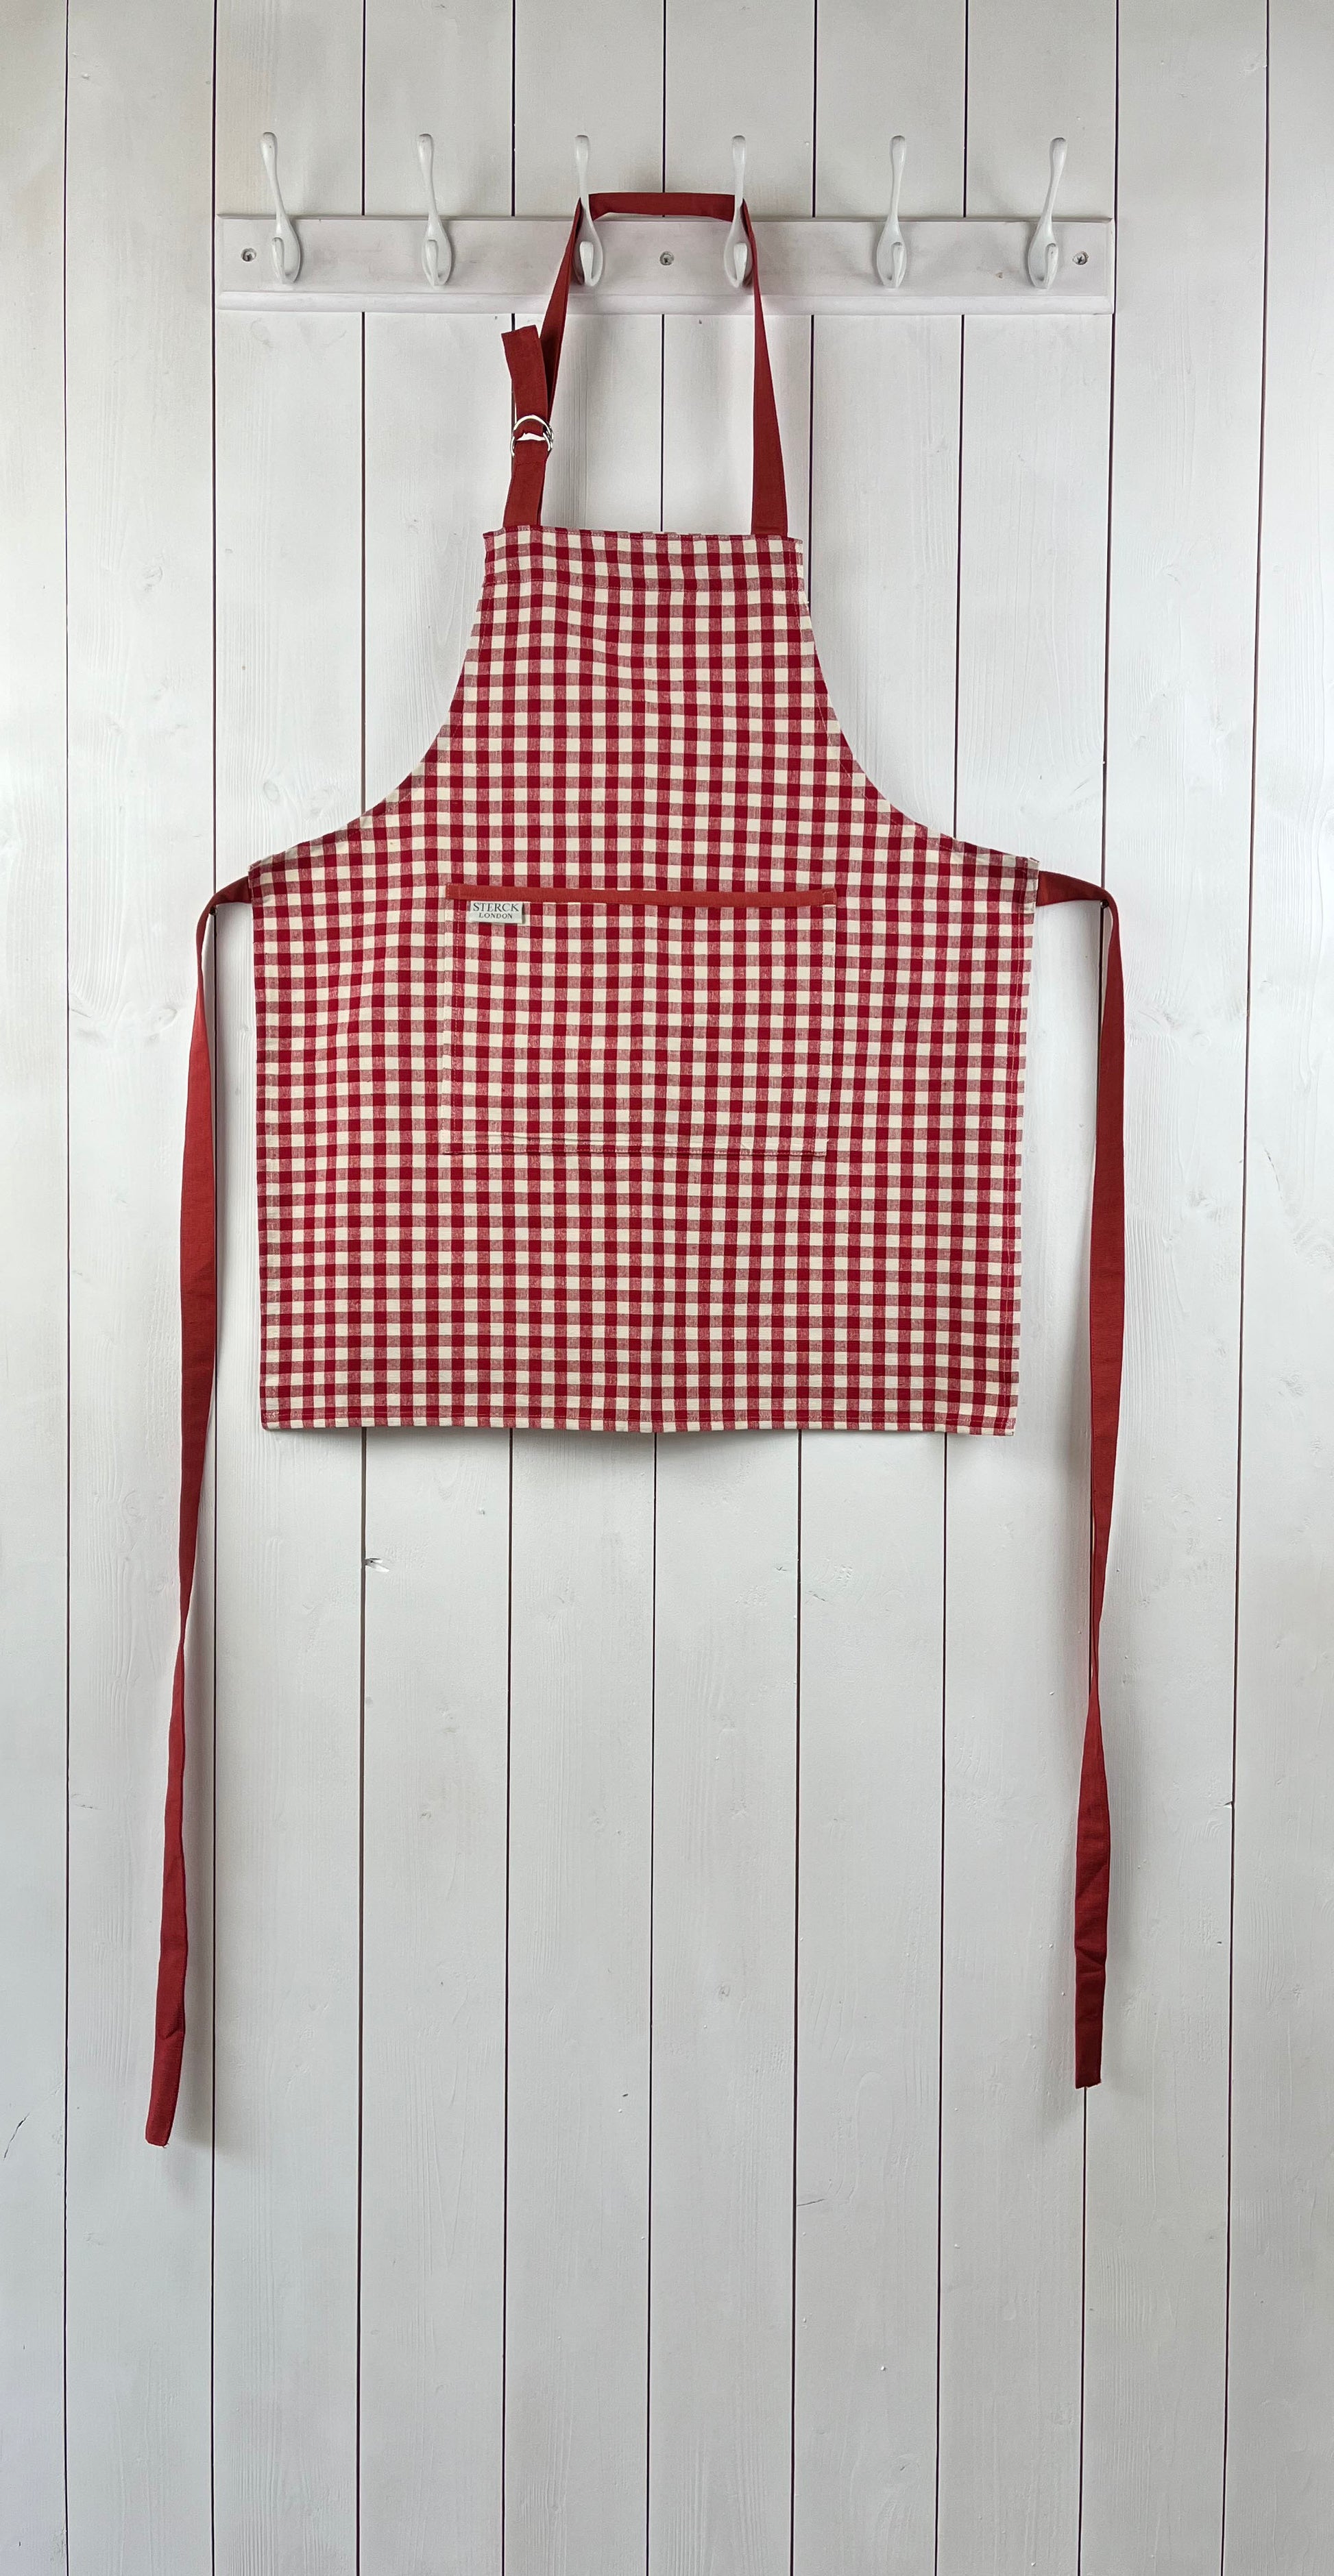 Red gingham apron for children with large front pocket and adjustable neck strap. TurQuaz.